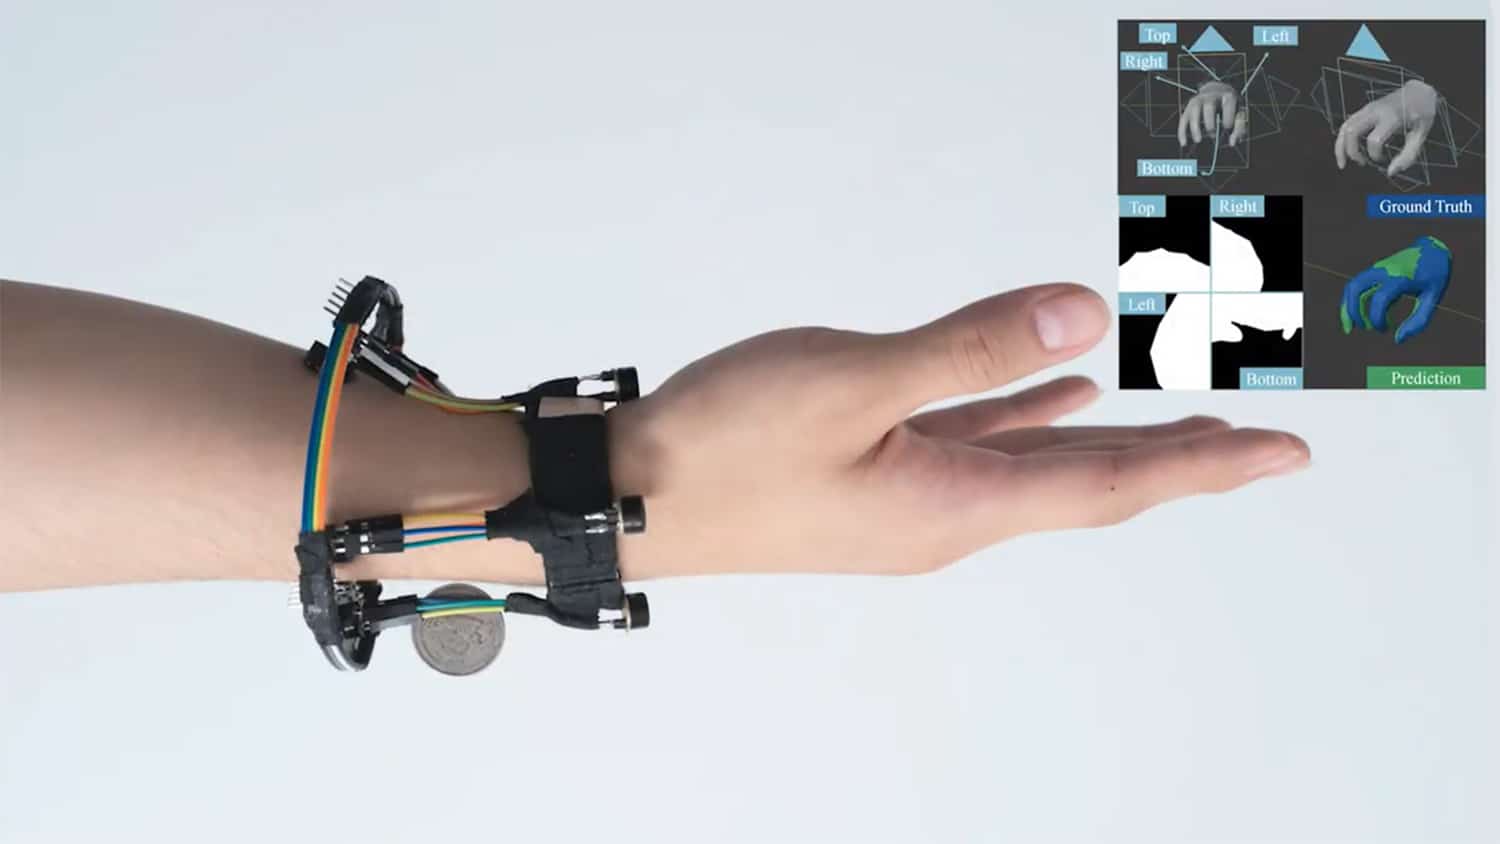 Wrist-mounted FingerTrak continuously tracks entire human hand in 3D.